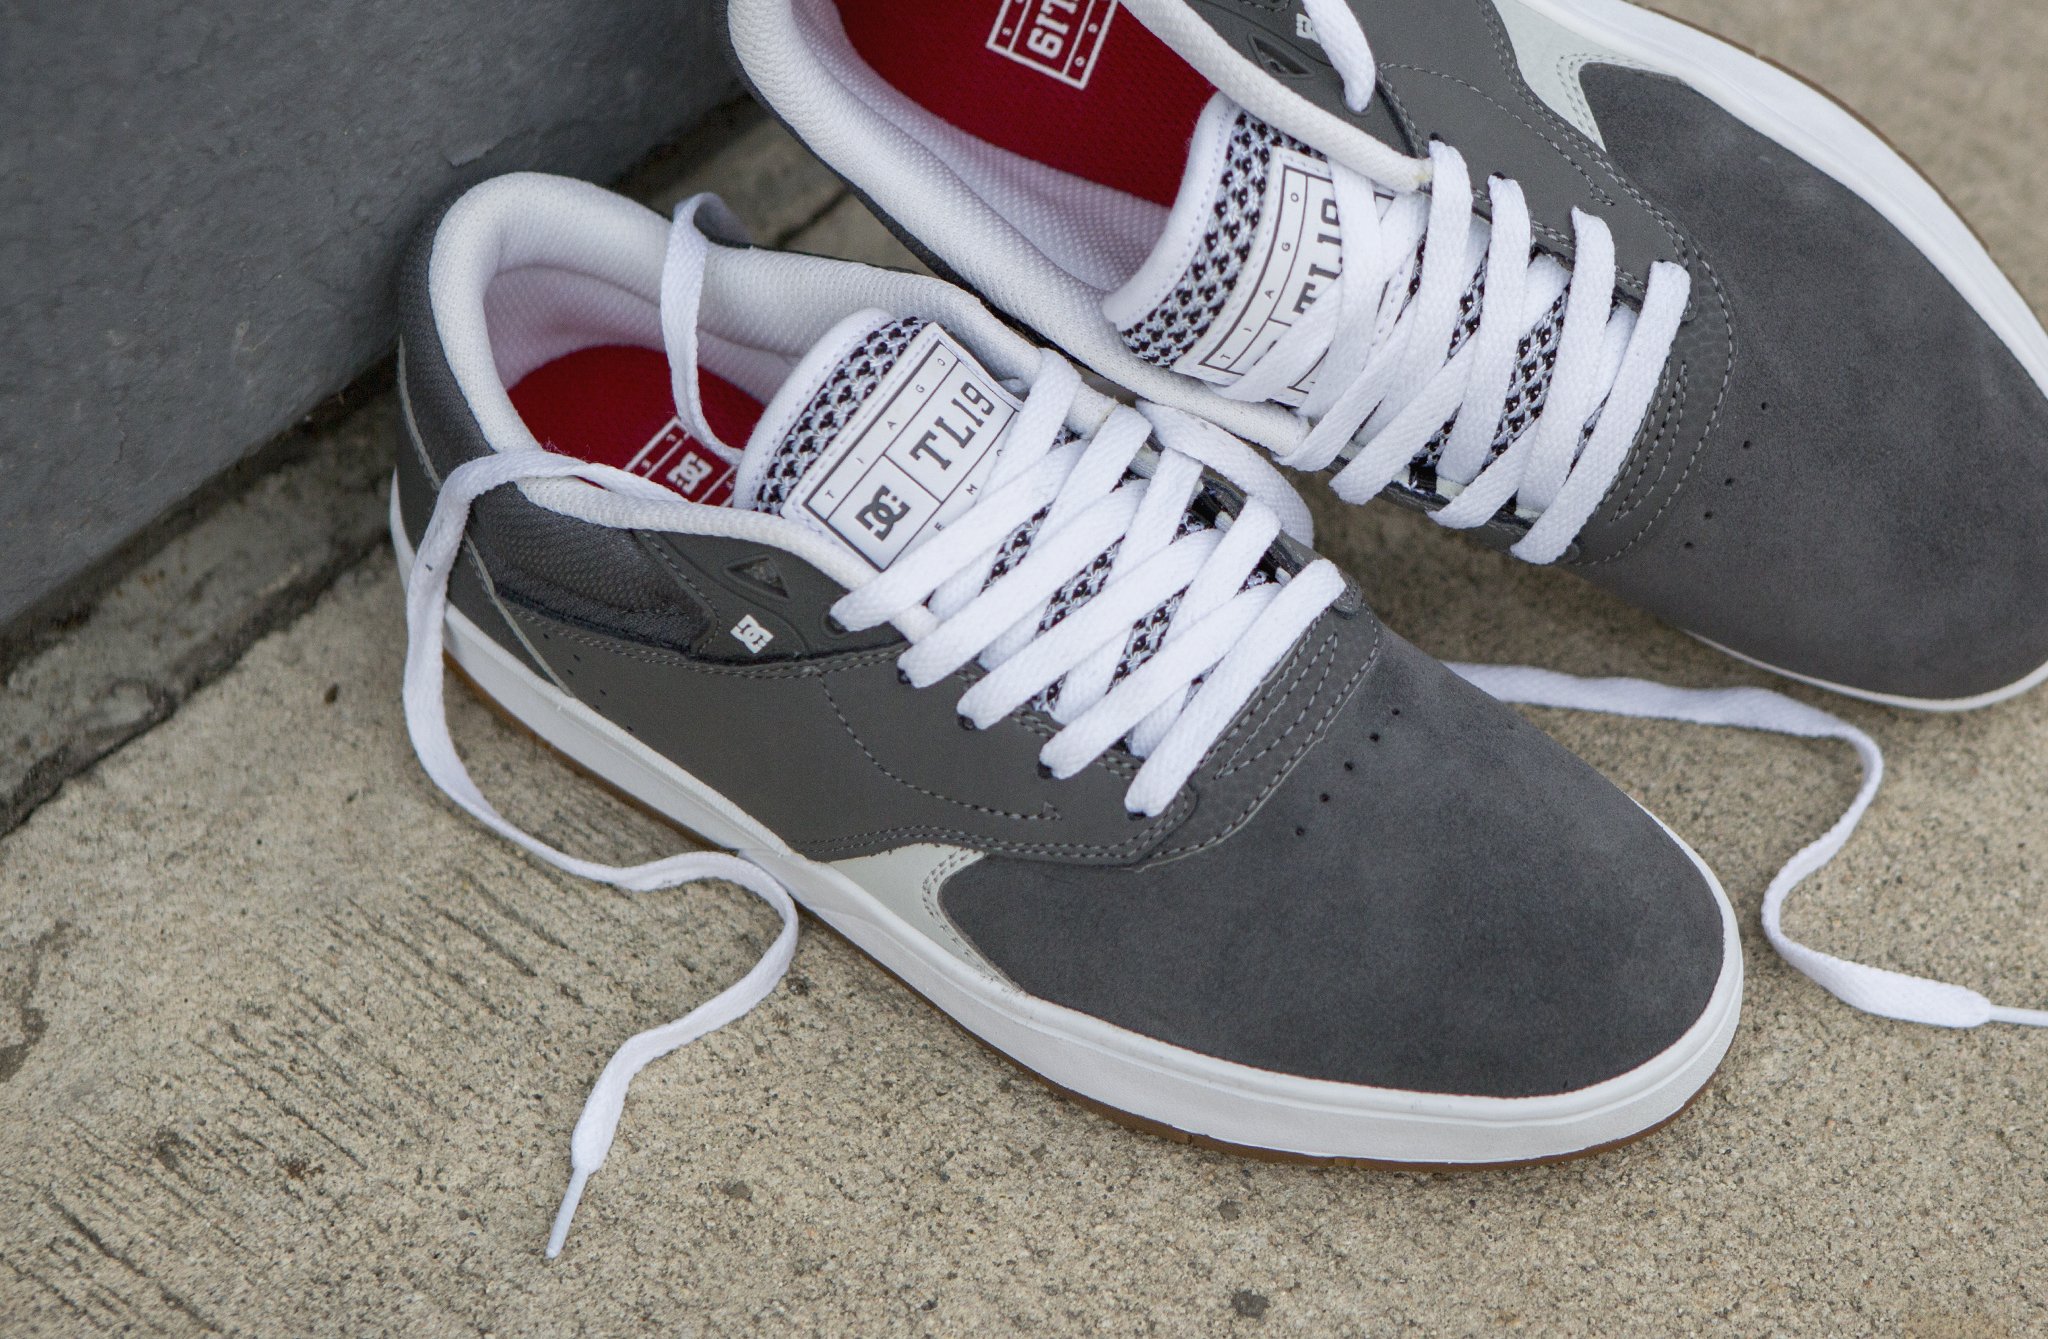 Wijde selectie Niet doen als resultaat DC Shoes on Twitter: "Peep the newest Grey/White color way of the Tiago  Lemos Signature Pro Model, now available at https://t.co/q5qSgr322j and  skate shops worldwide. https://t.co/x4RU8Jv34g" / Twitter